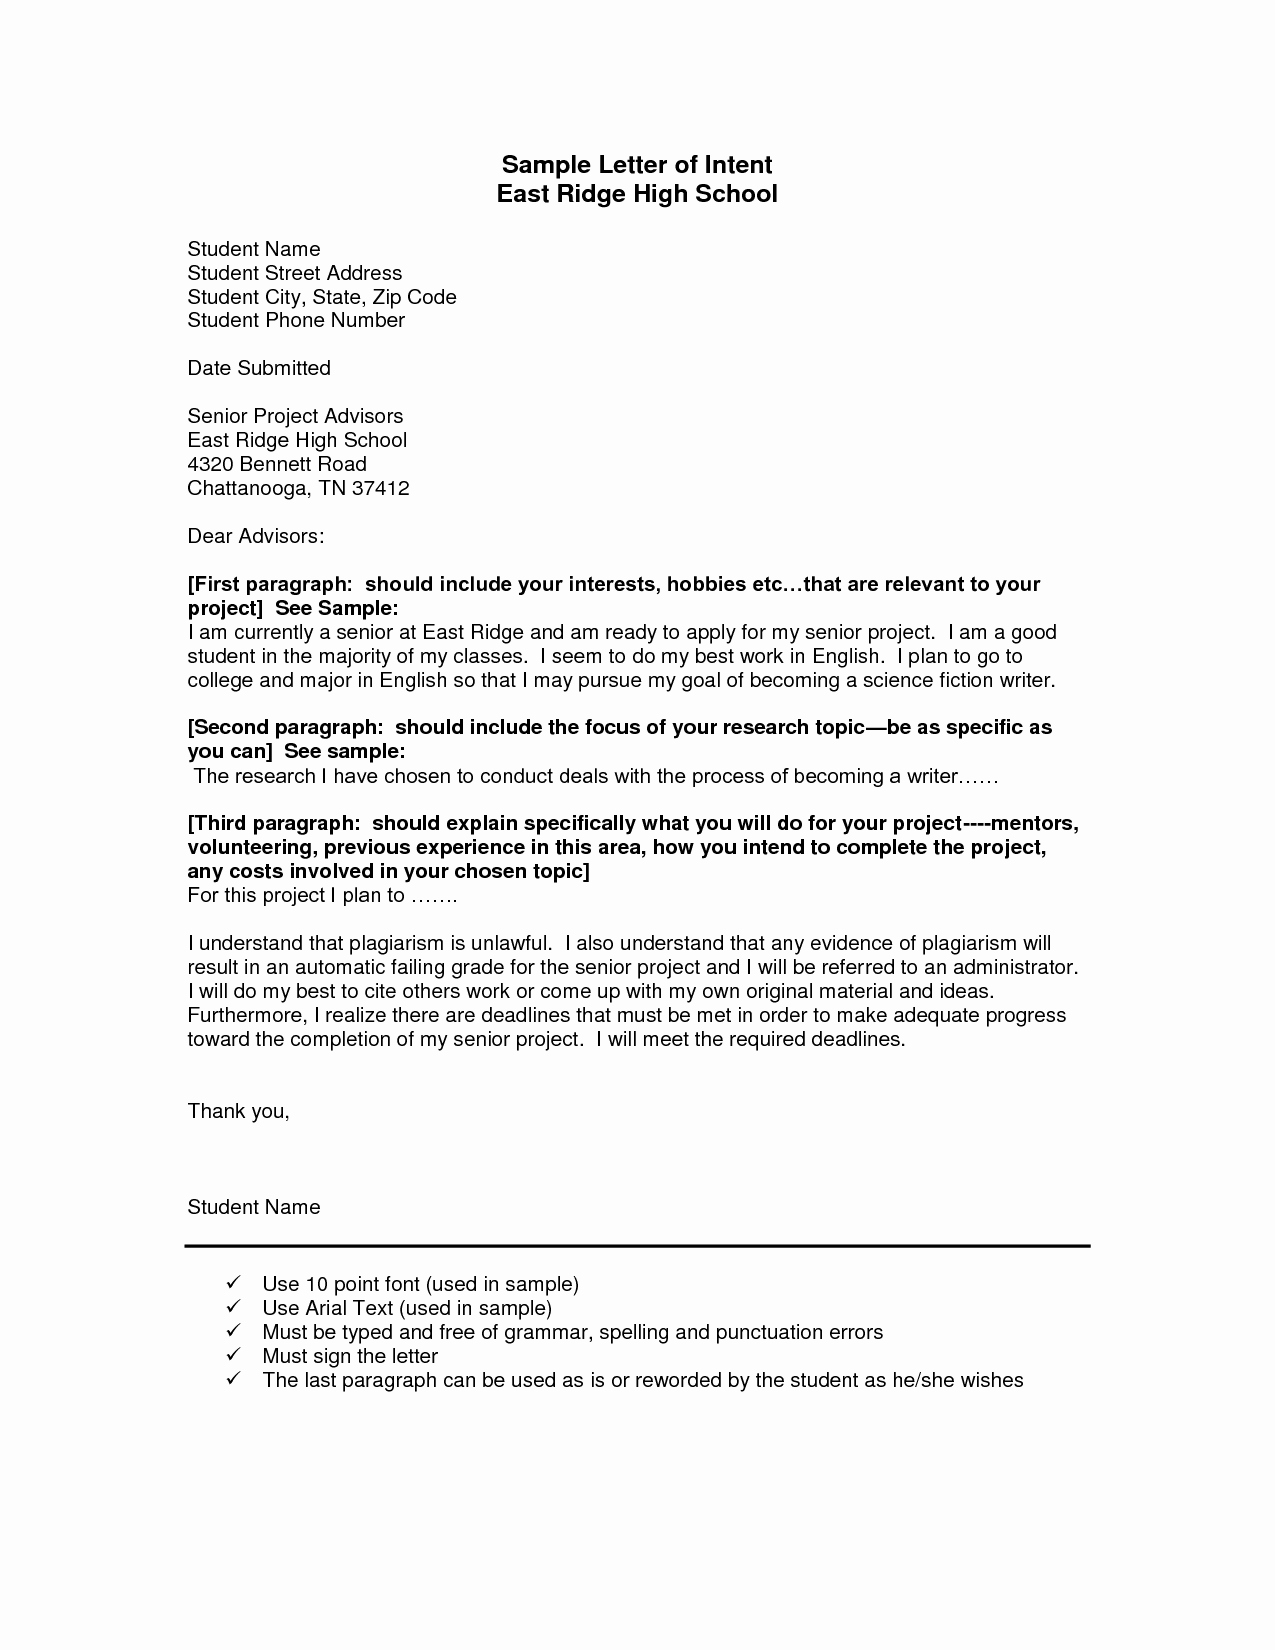 Letter Of Intent Construction Lovely Business Letter Intent Sample Resume Builder Letter Of Intent format In 2019